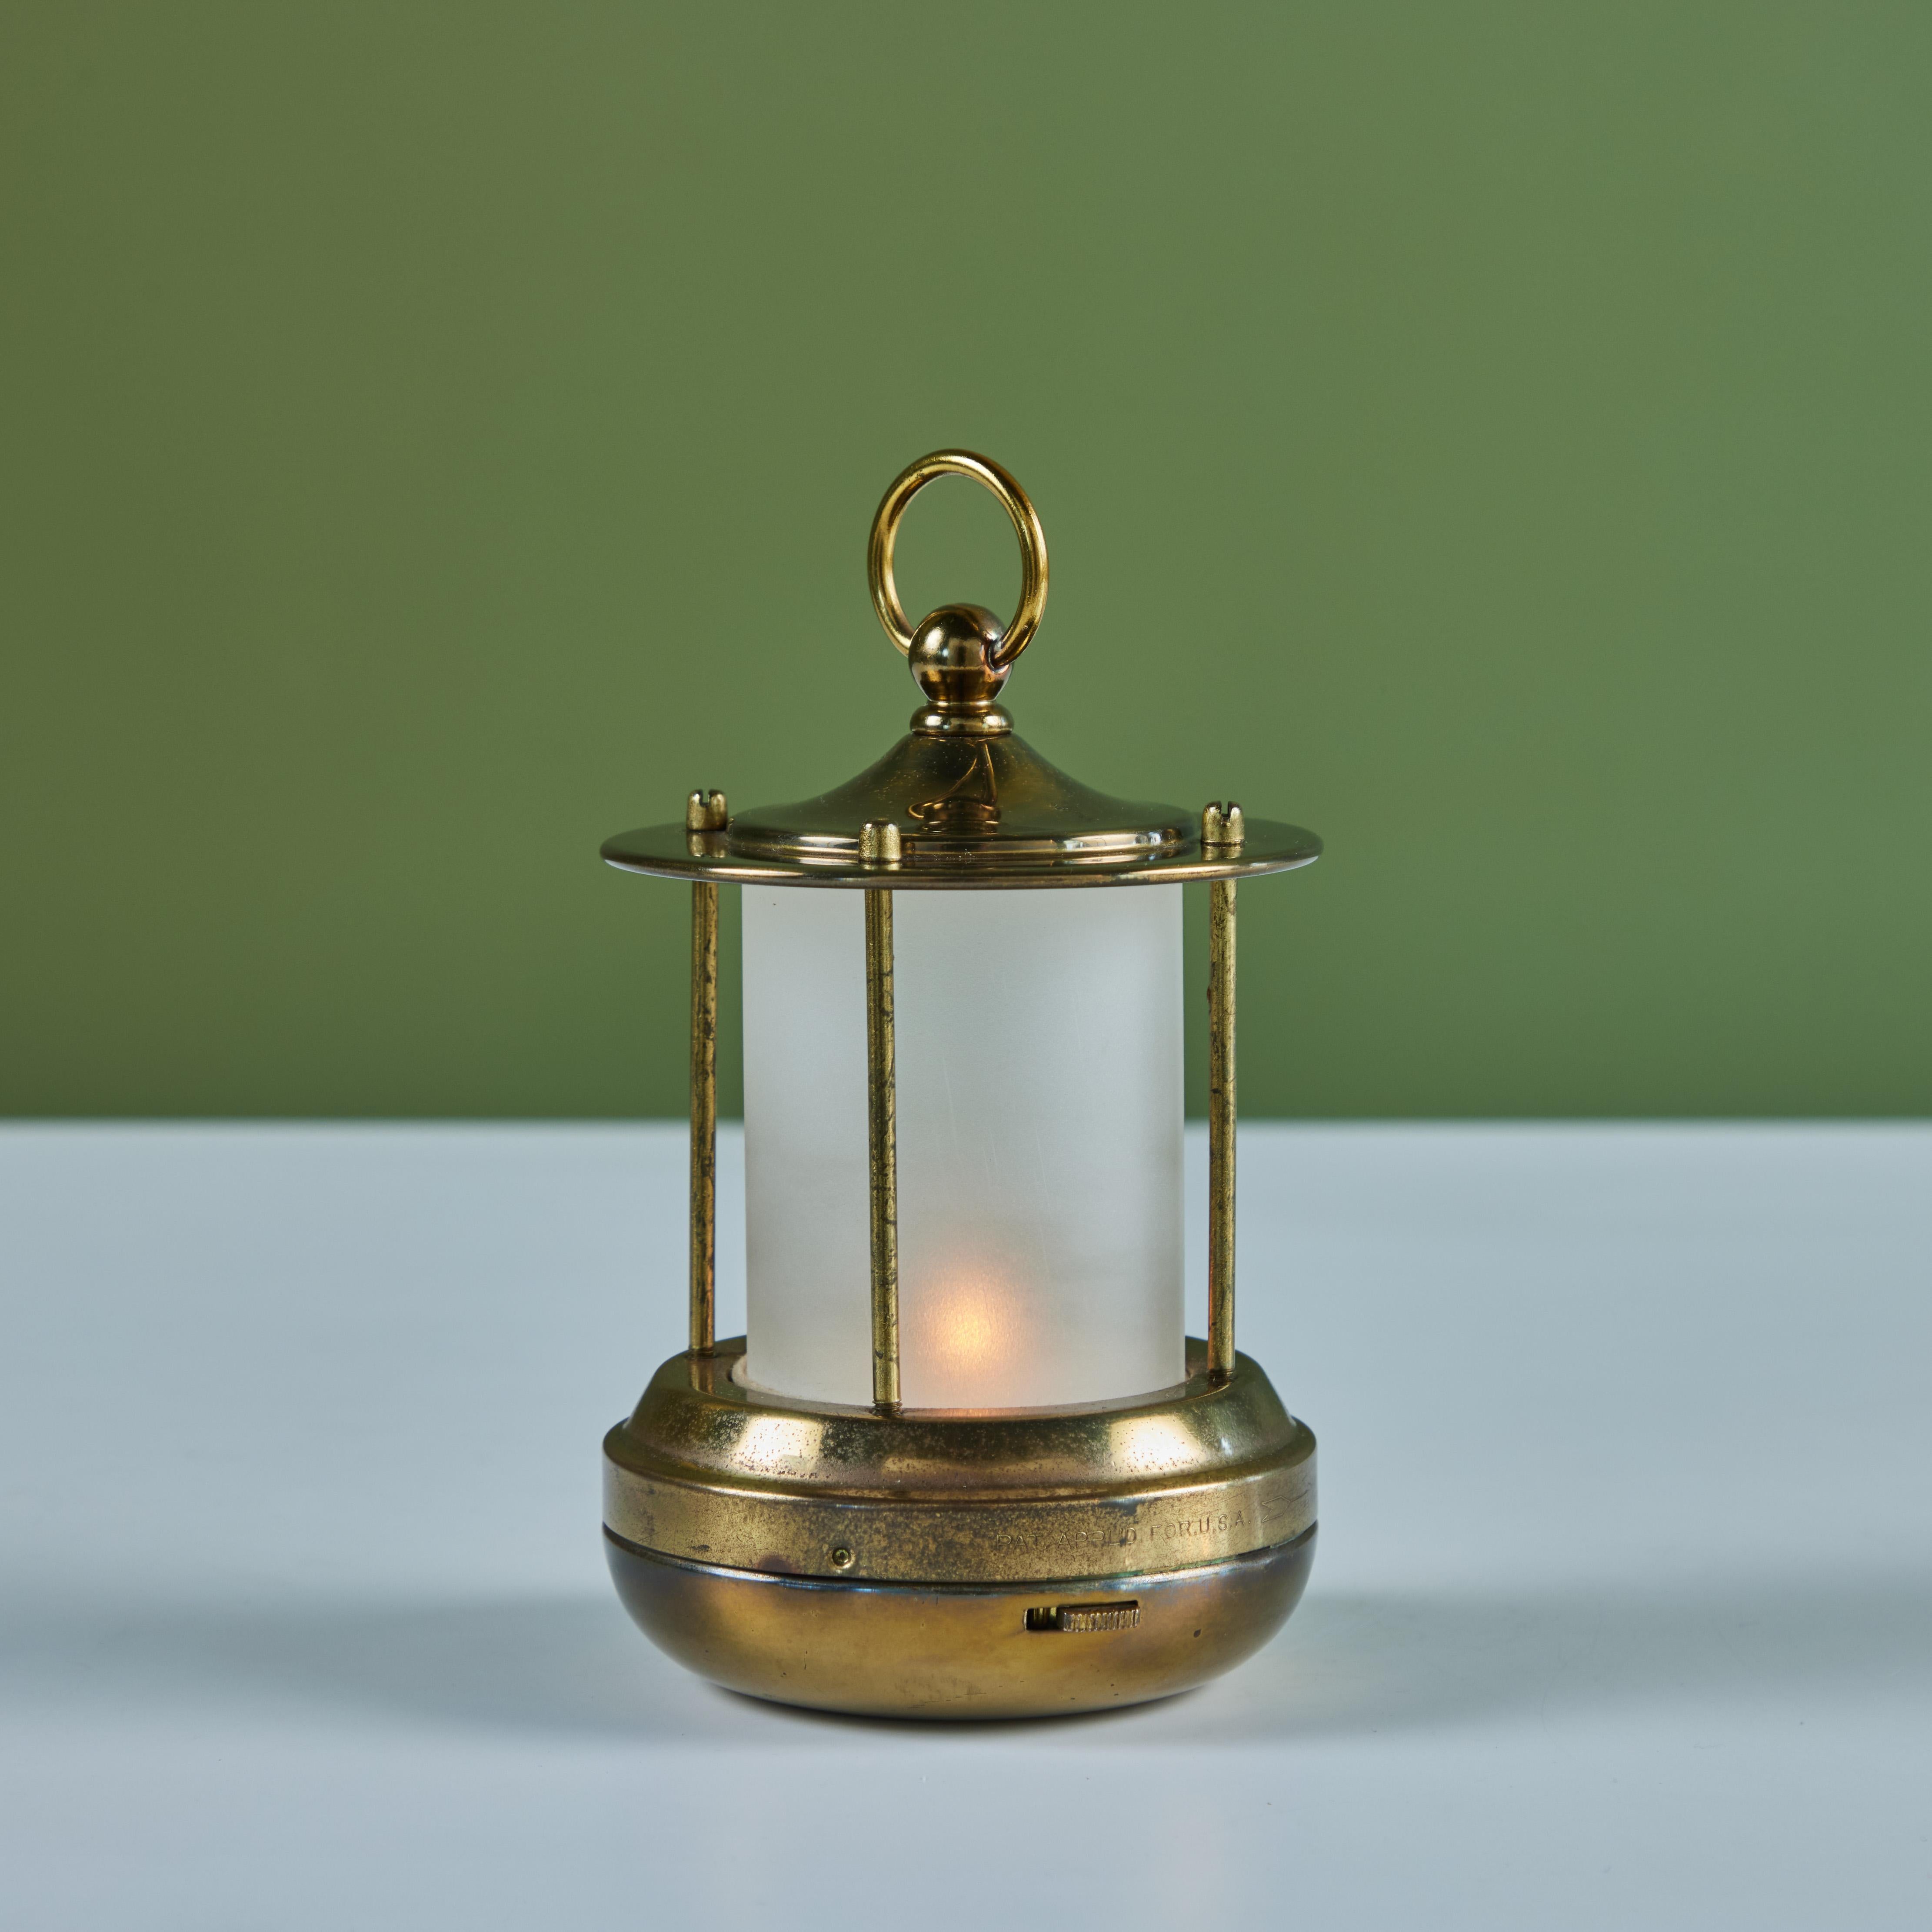 Petite brass lantern style table lamp for Chase, c.1930s, USA. The Art Deco lamp features a cylindrical cone shaped glass with a brass base and cap with handle. This particular lamp is battery powered with two C batteries so it can be placed